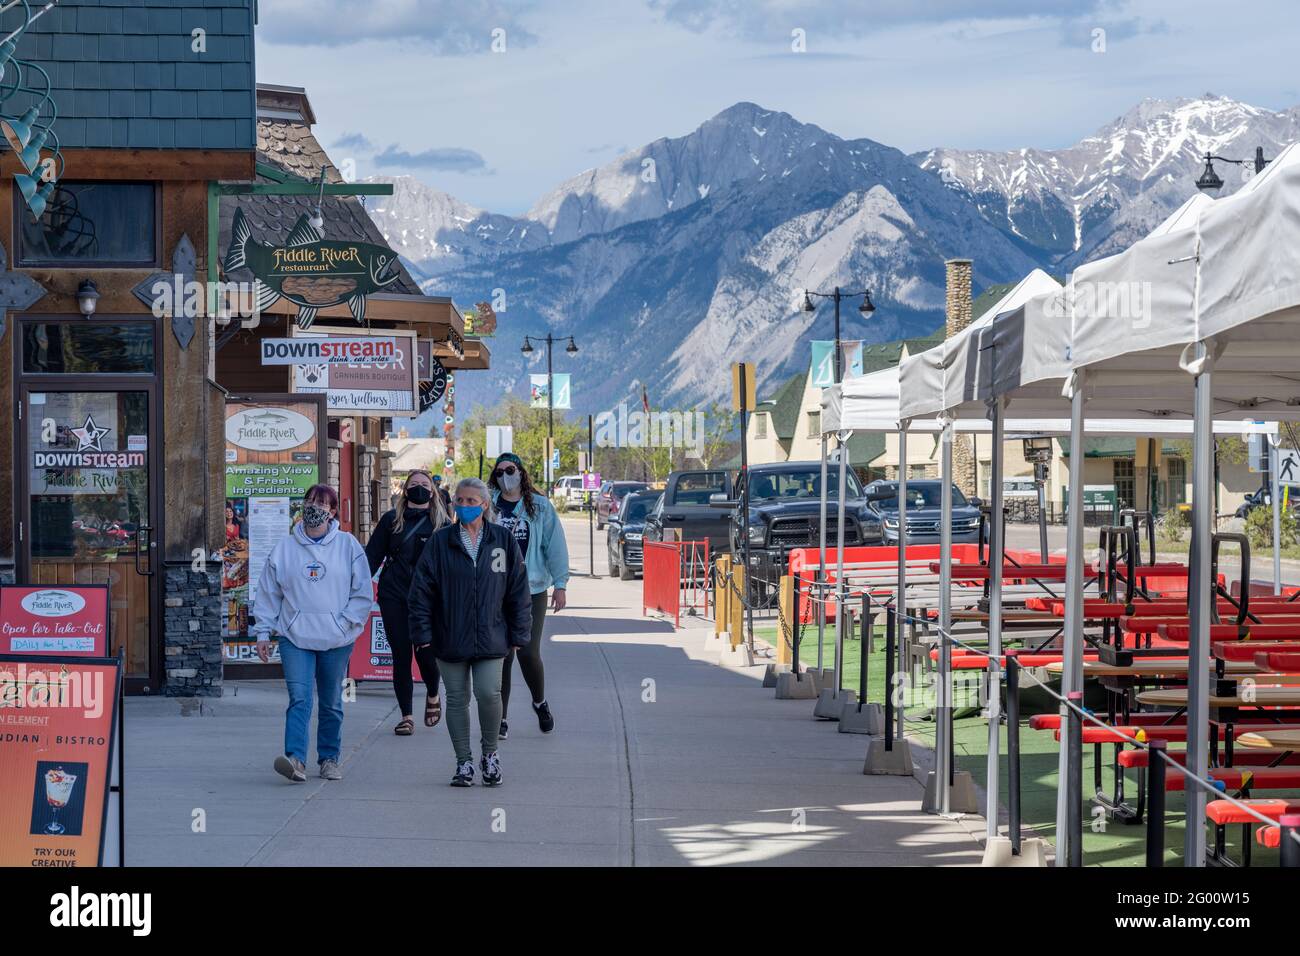 Street view of Town Jasper in summer time season during covid-20 pandemic period, people are wearing face masks. Jasper, Alberta, Canada. Stock Photo